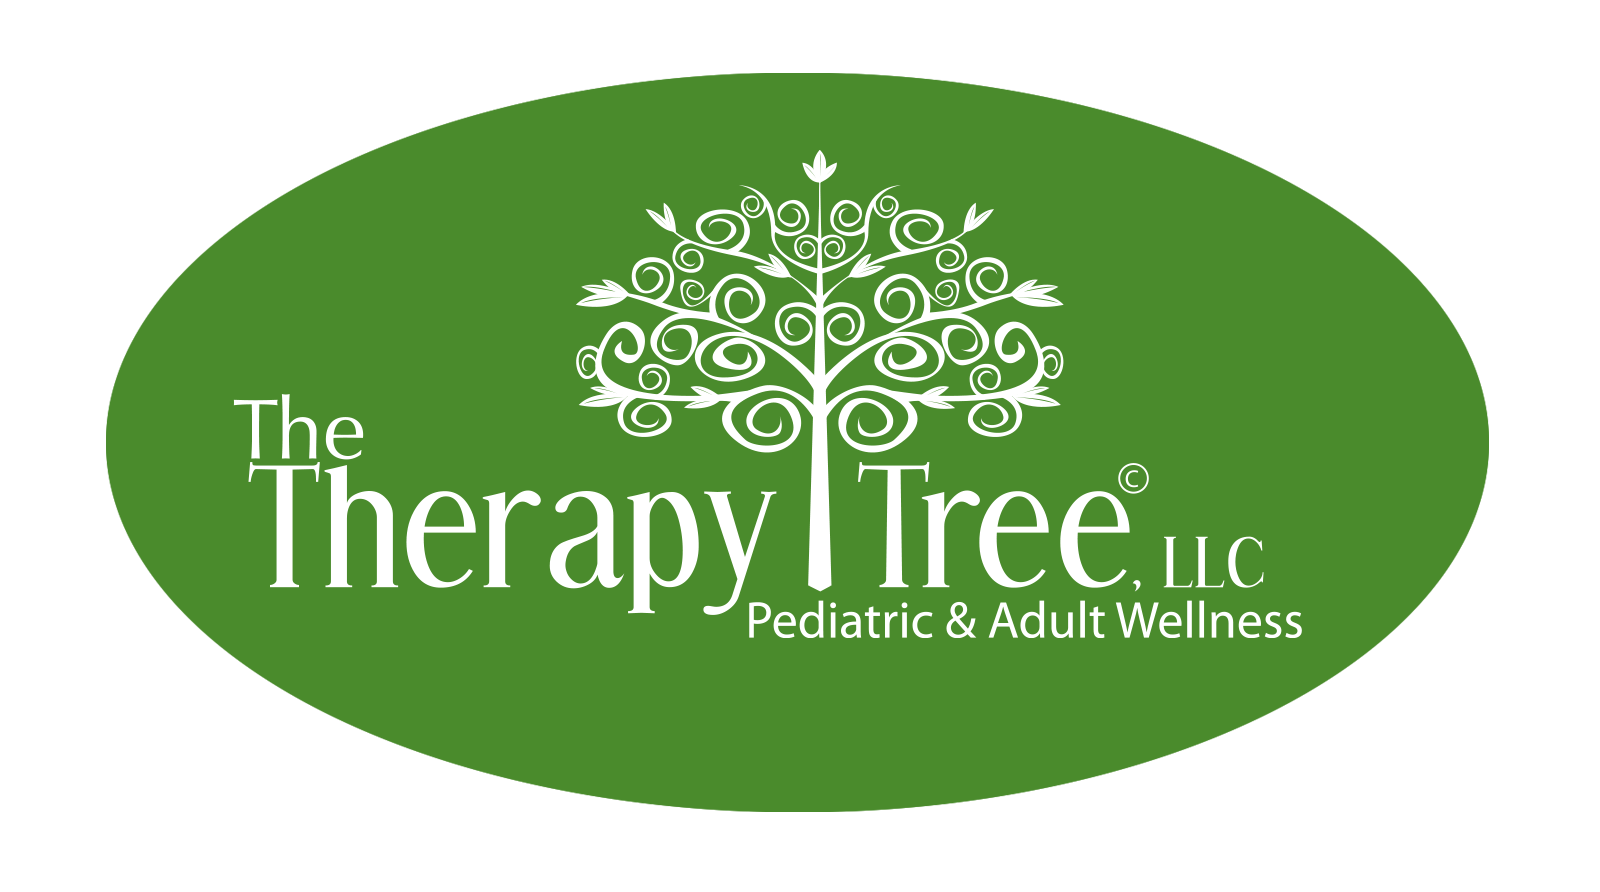 The Therapy Tree